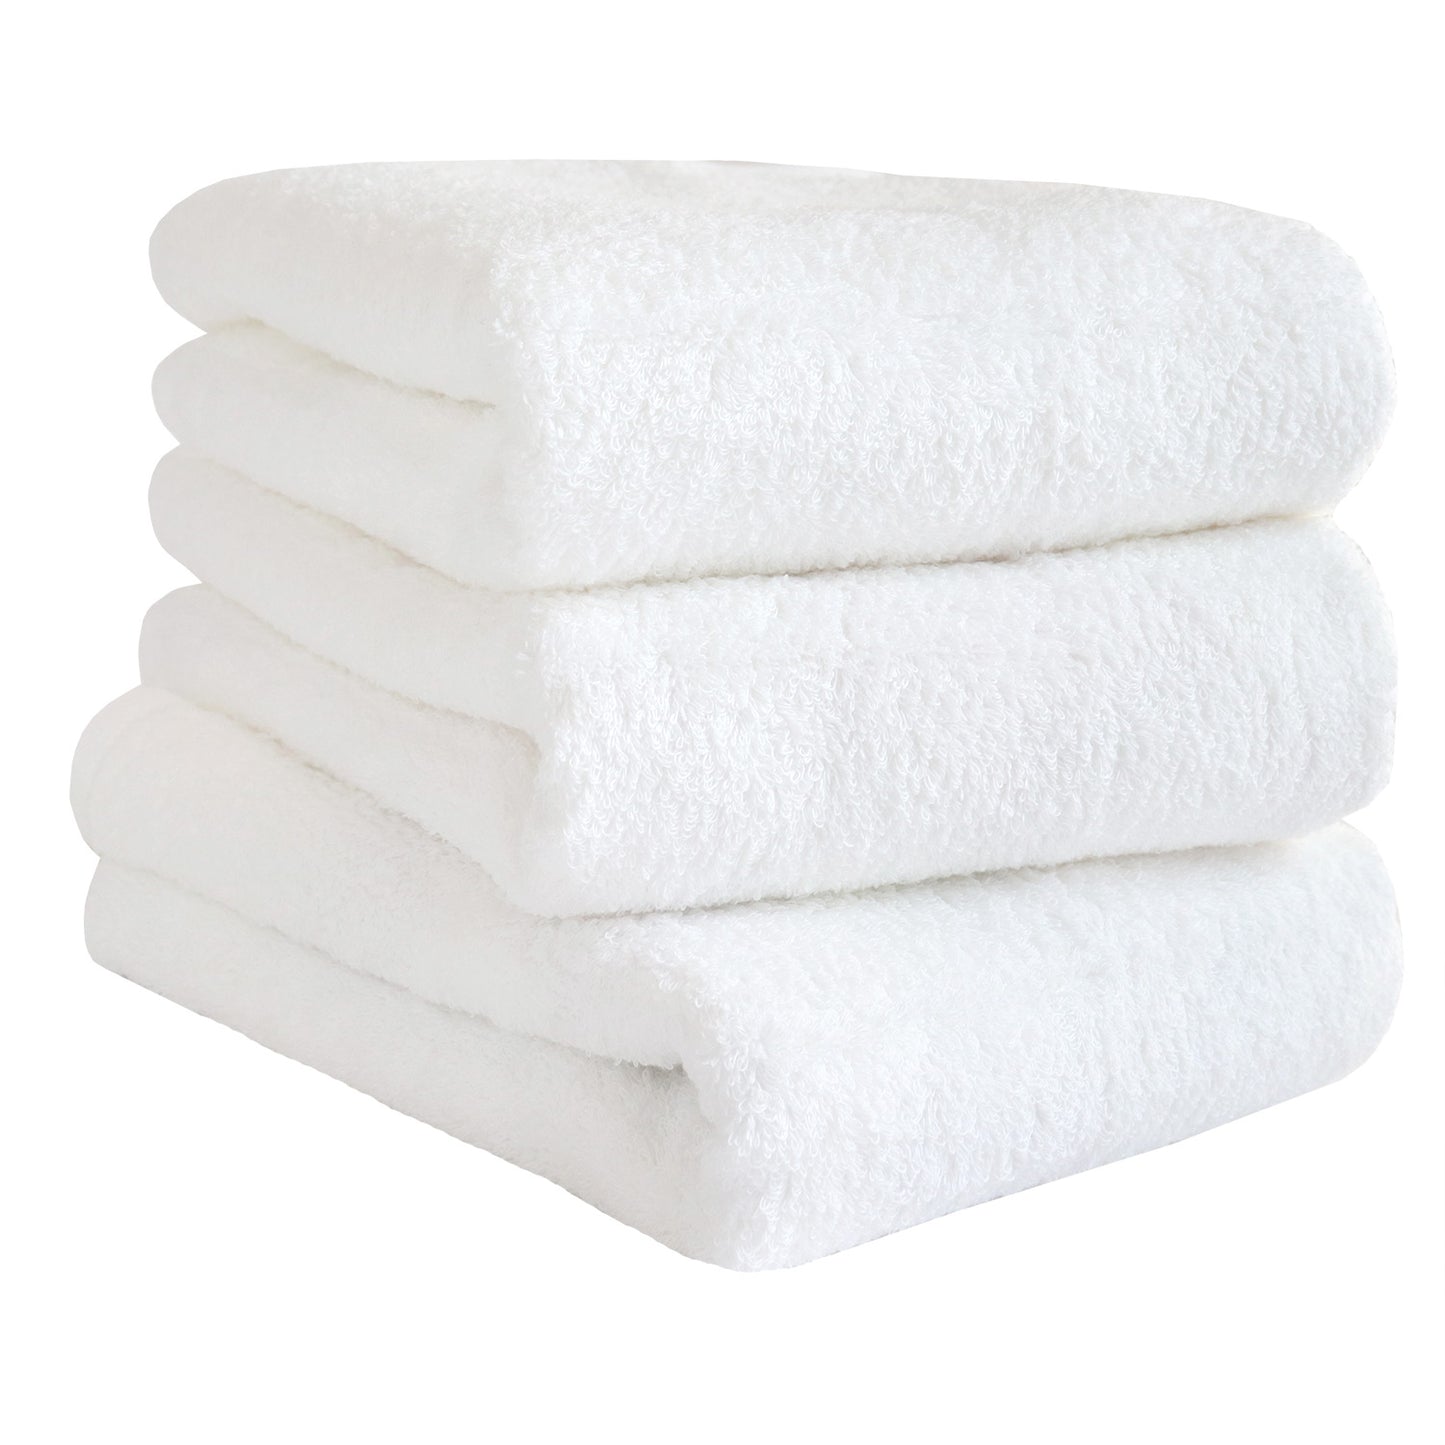 [Limited edition]Special Deal Hiorie Hotel Classy Water Absorption Bath Towel